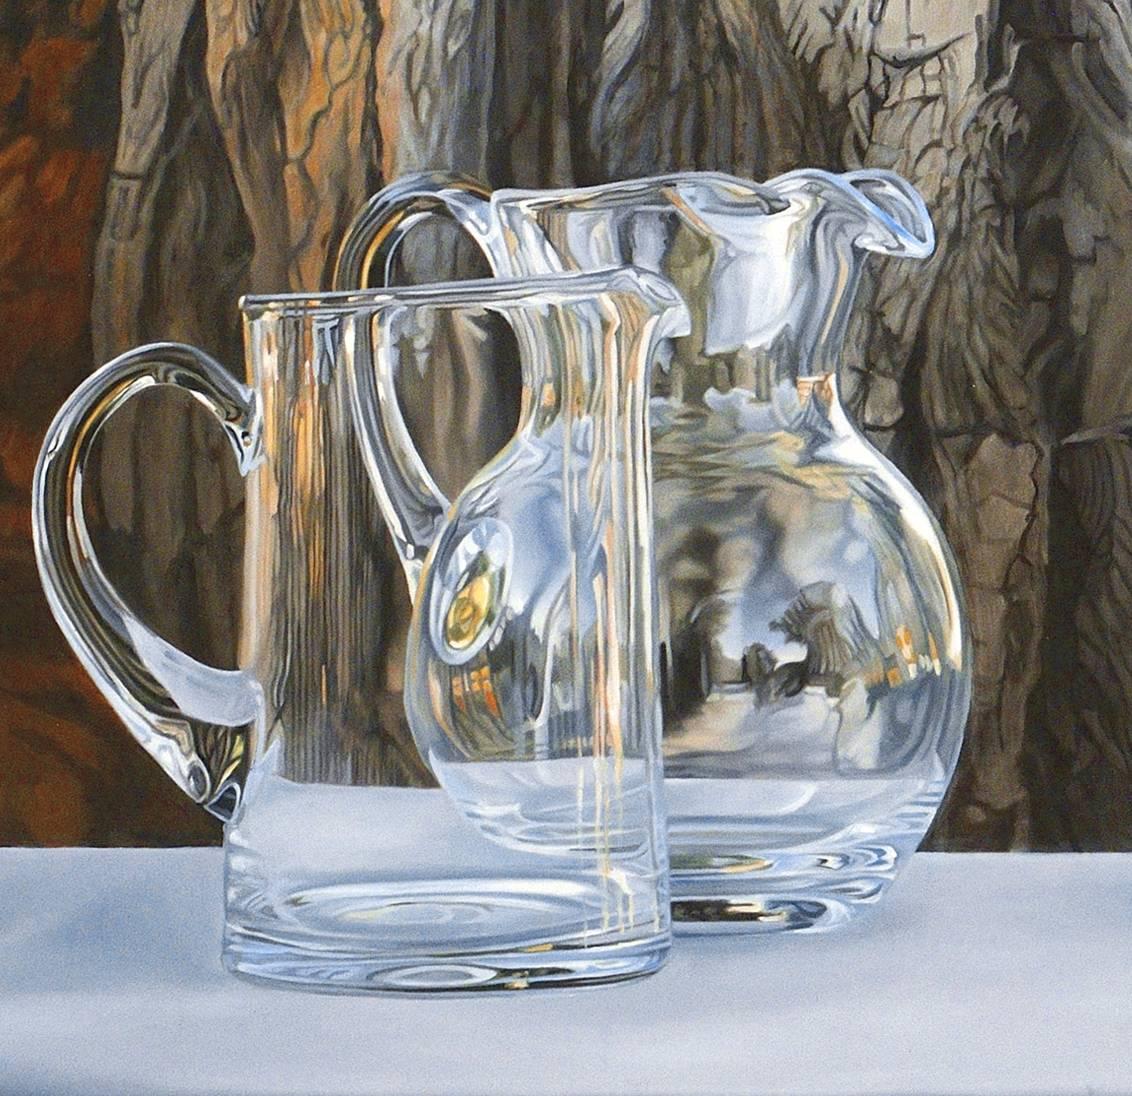 THE LAST TREE, glass on white-clothed table, photo-realism, bark, tree - Gray Still-Life Painting by Steve Smulka